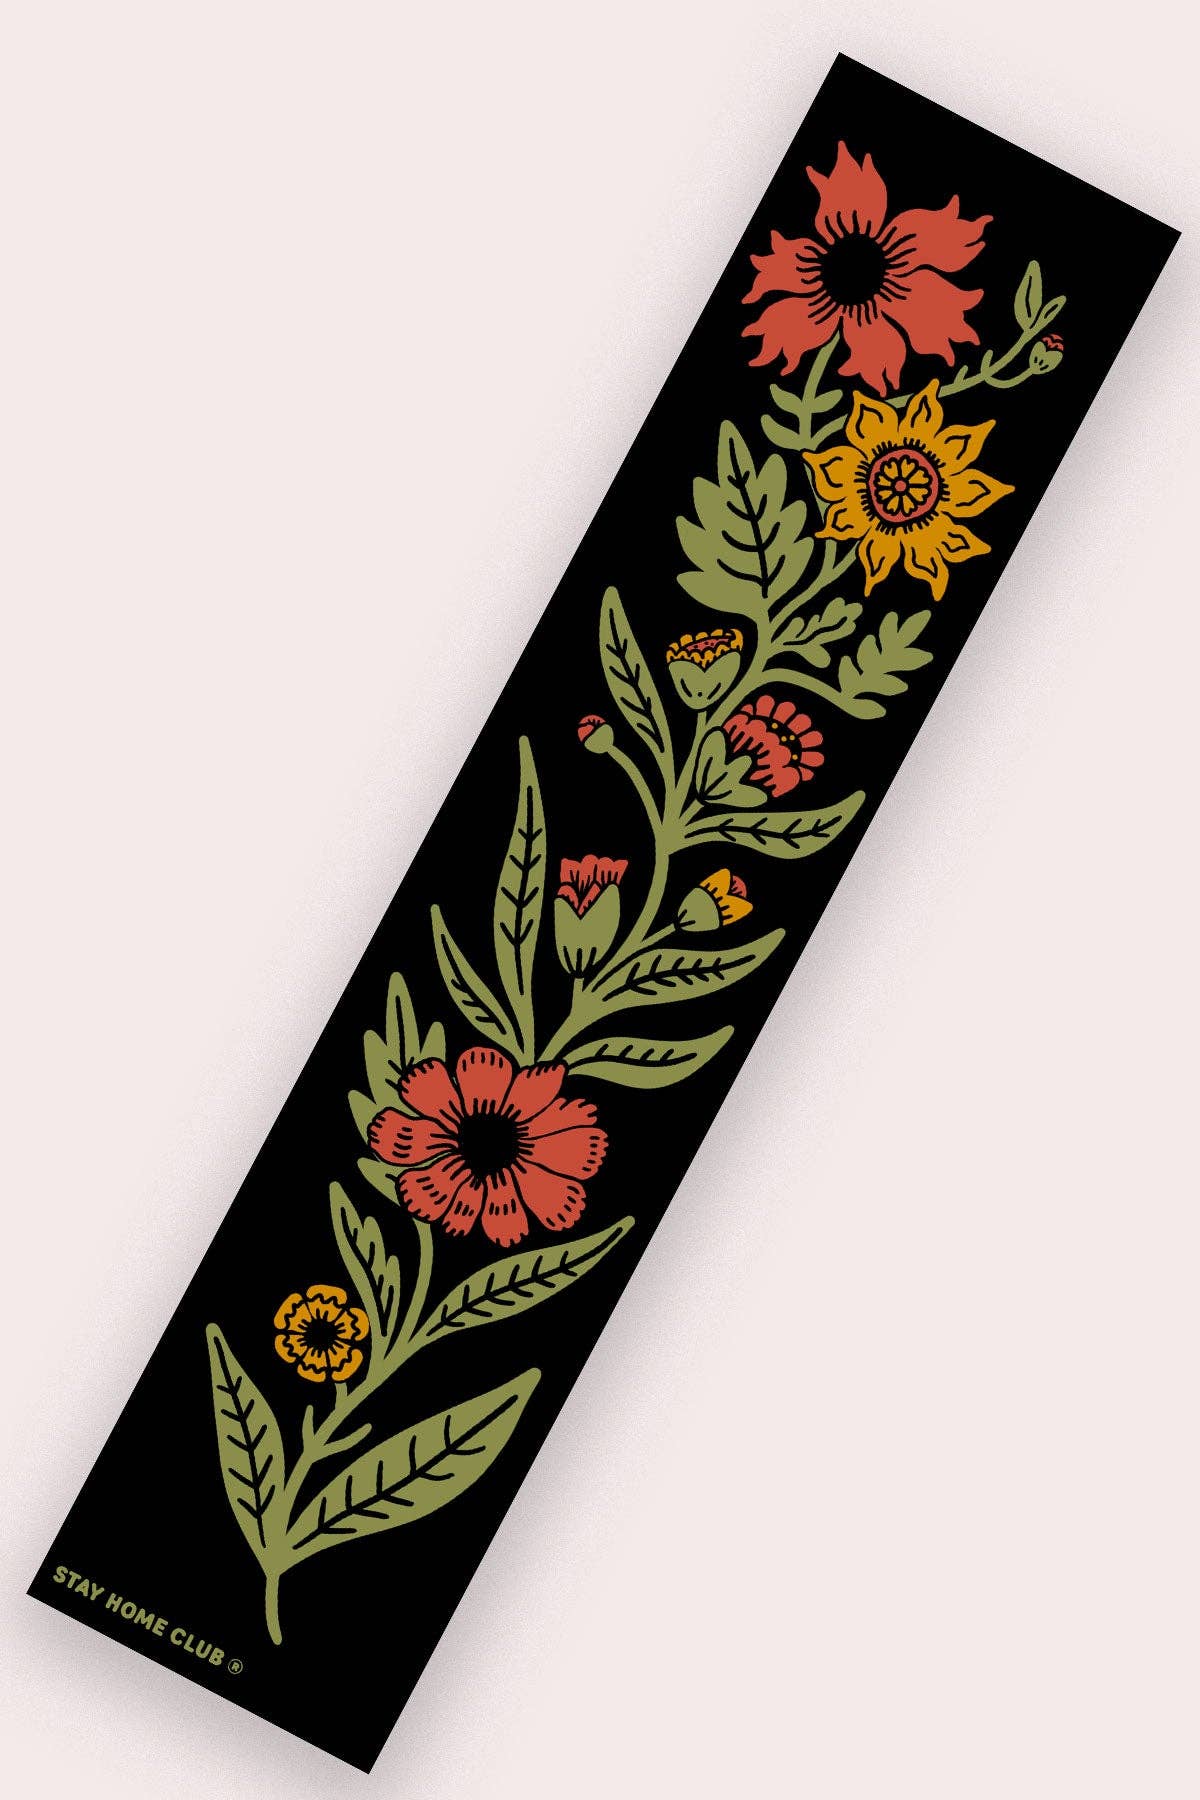 Red House Floral Bumper Sticker - Out of the Blue